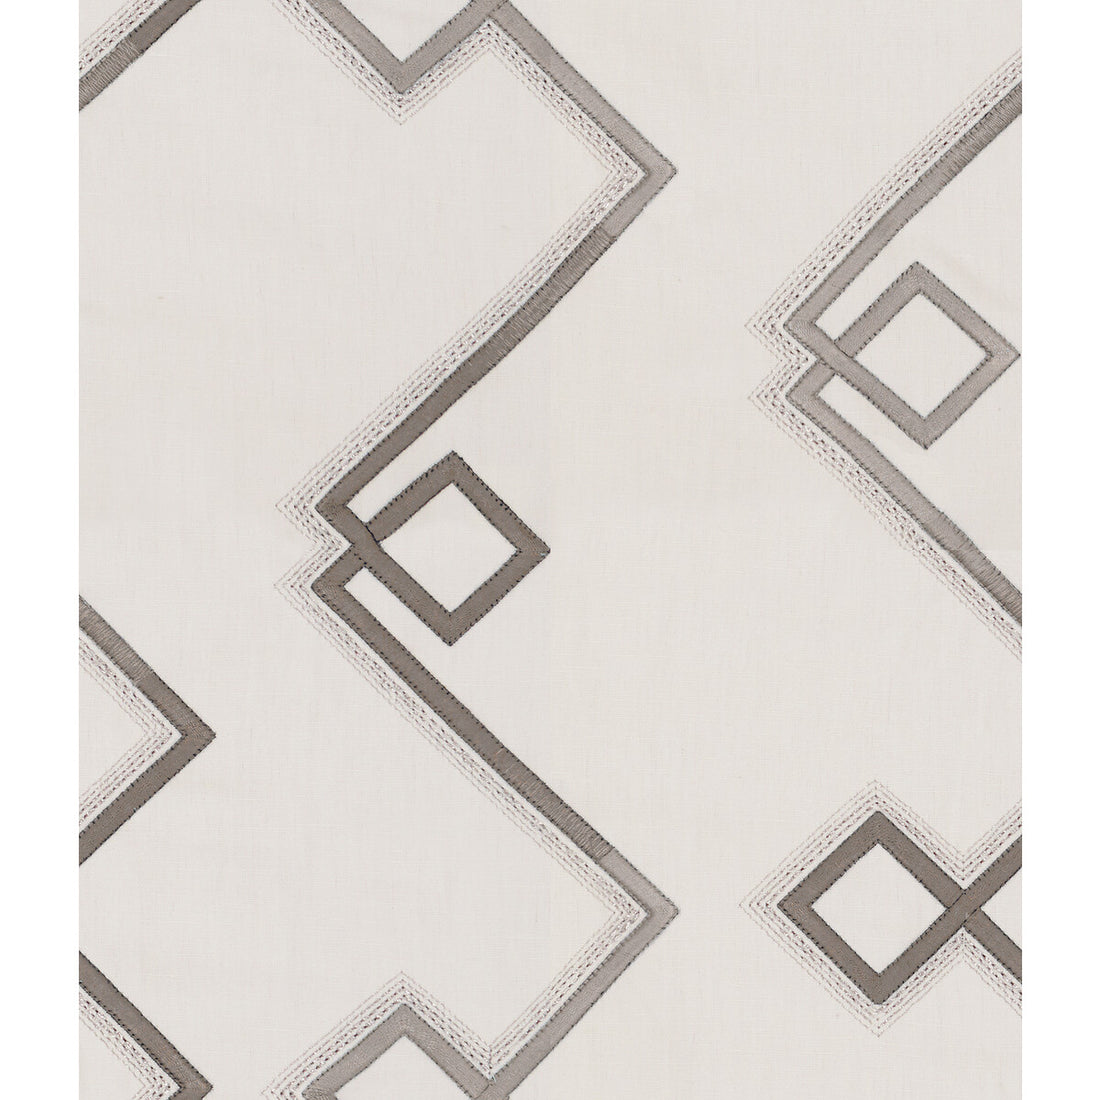 Prism Emb fabric in grey color - pattern GWF-3706.11.0 - by Lee Jofa Modern in the Prism collection